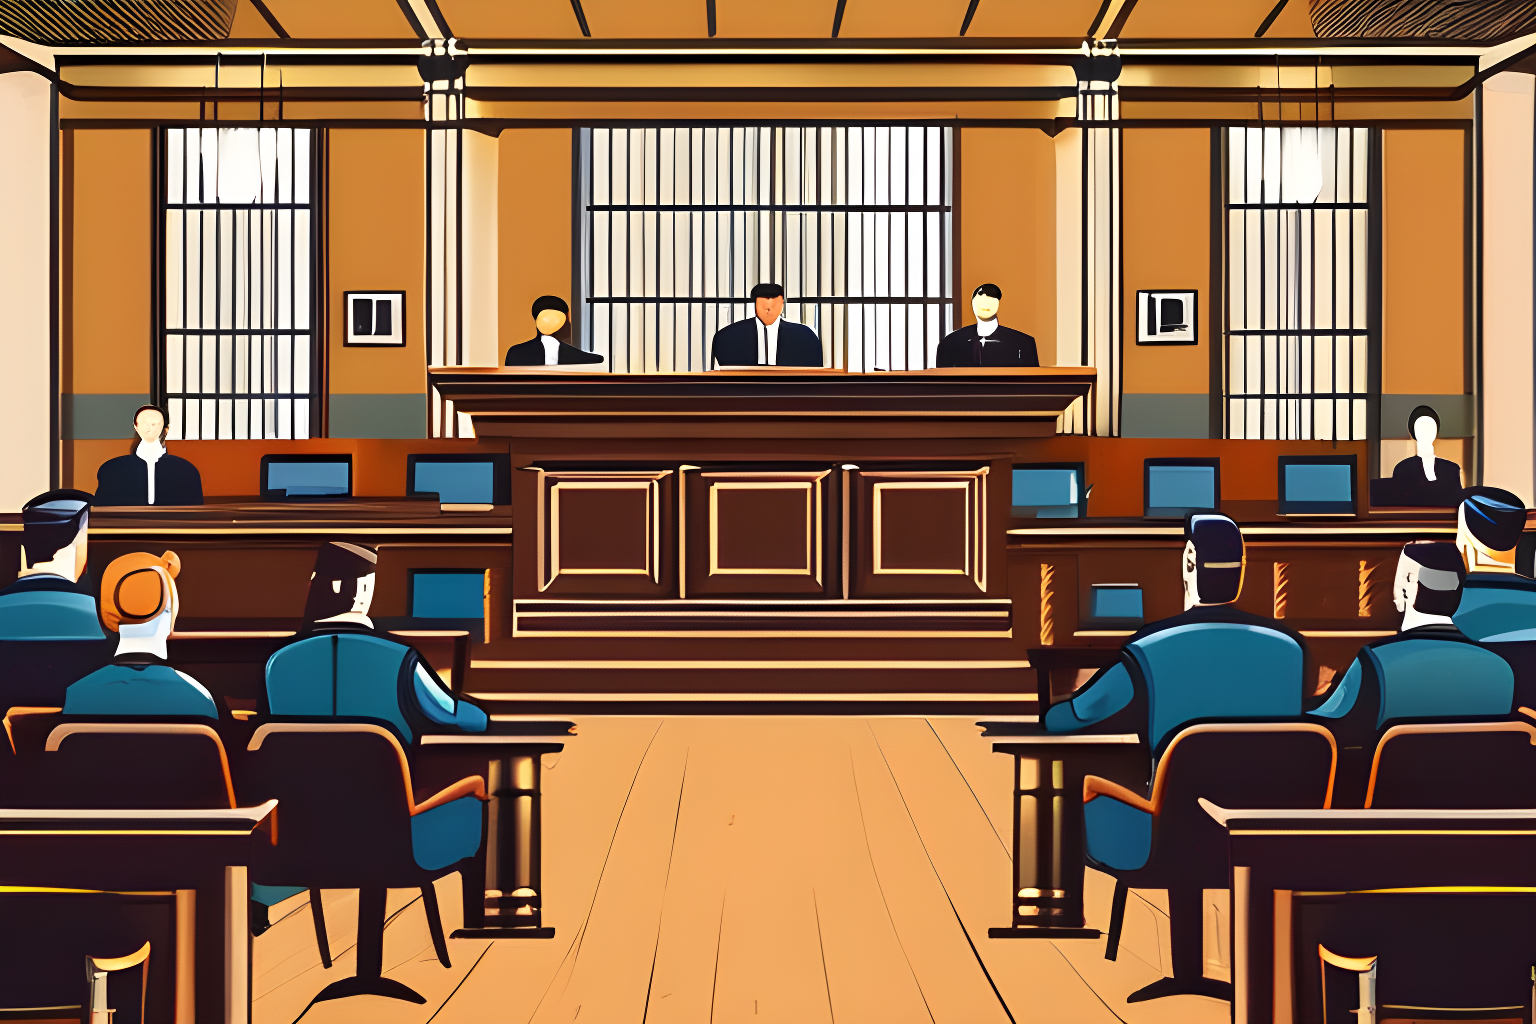 Illustrate a court room full of people